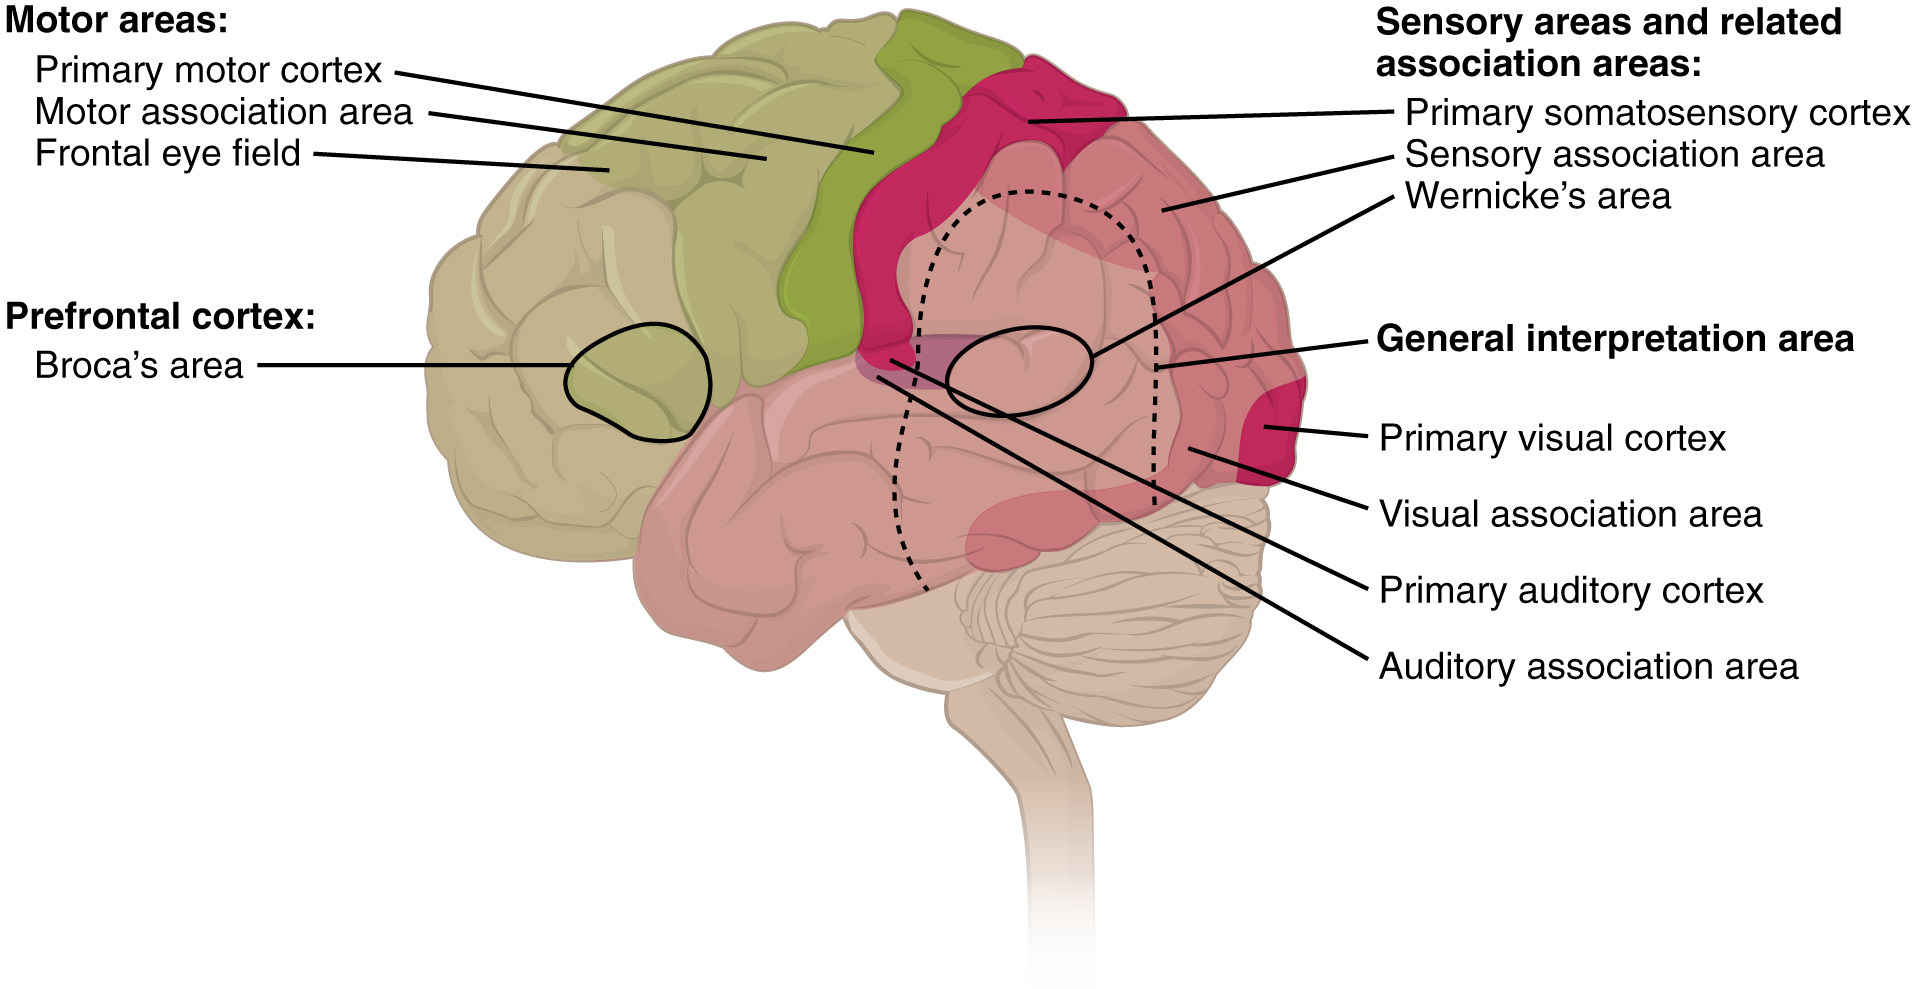 This figure shows the brain with the different regions colored differently. Text callouts from each region show the function of that particular region.